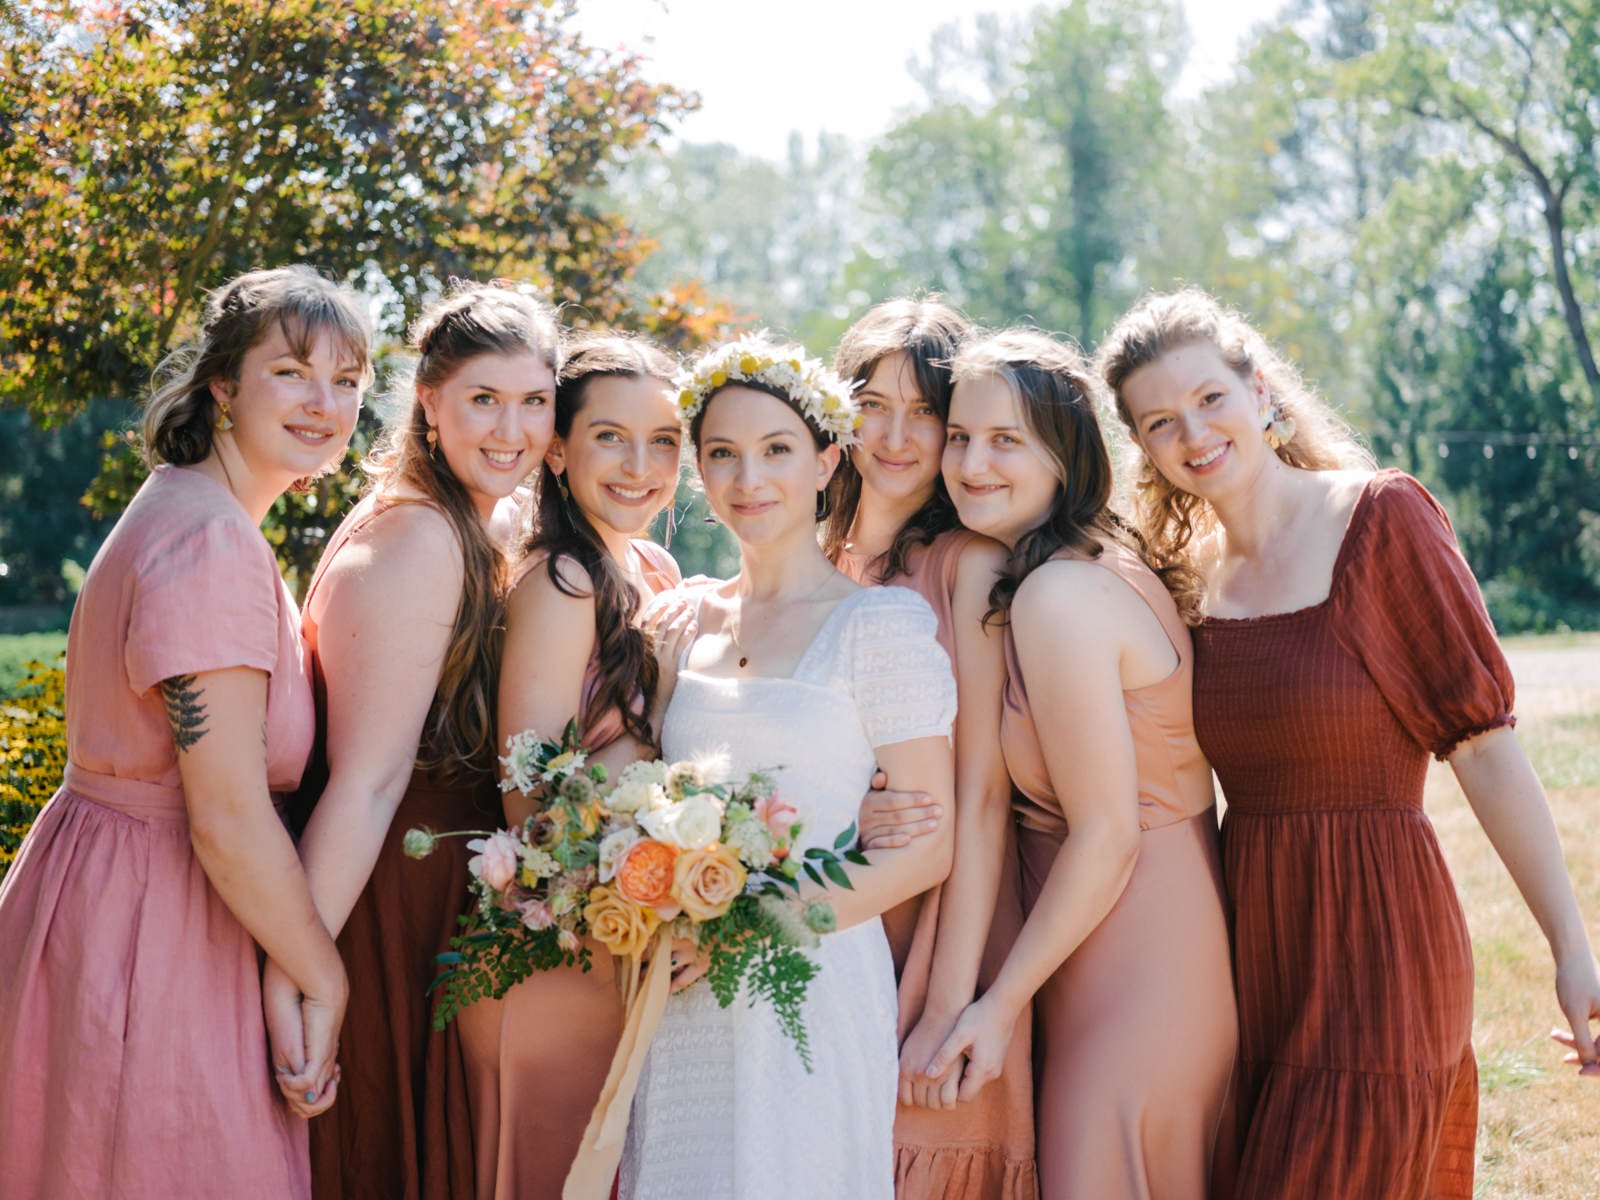  Bride with flower crown and bridesmaids in peach red and pink dresses snuggle together 